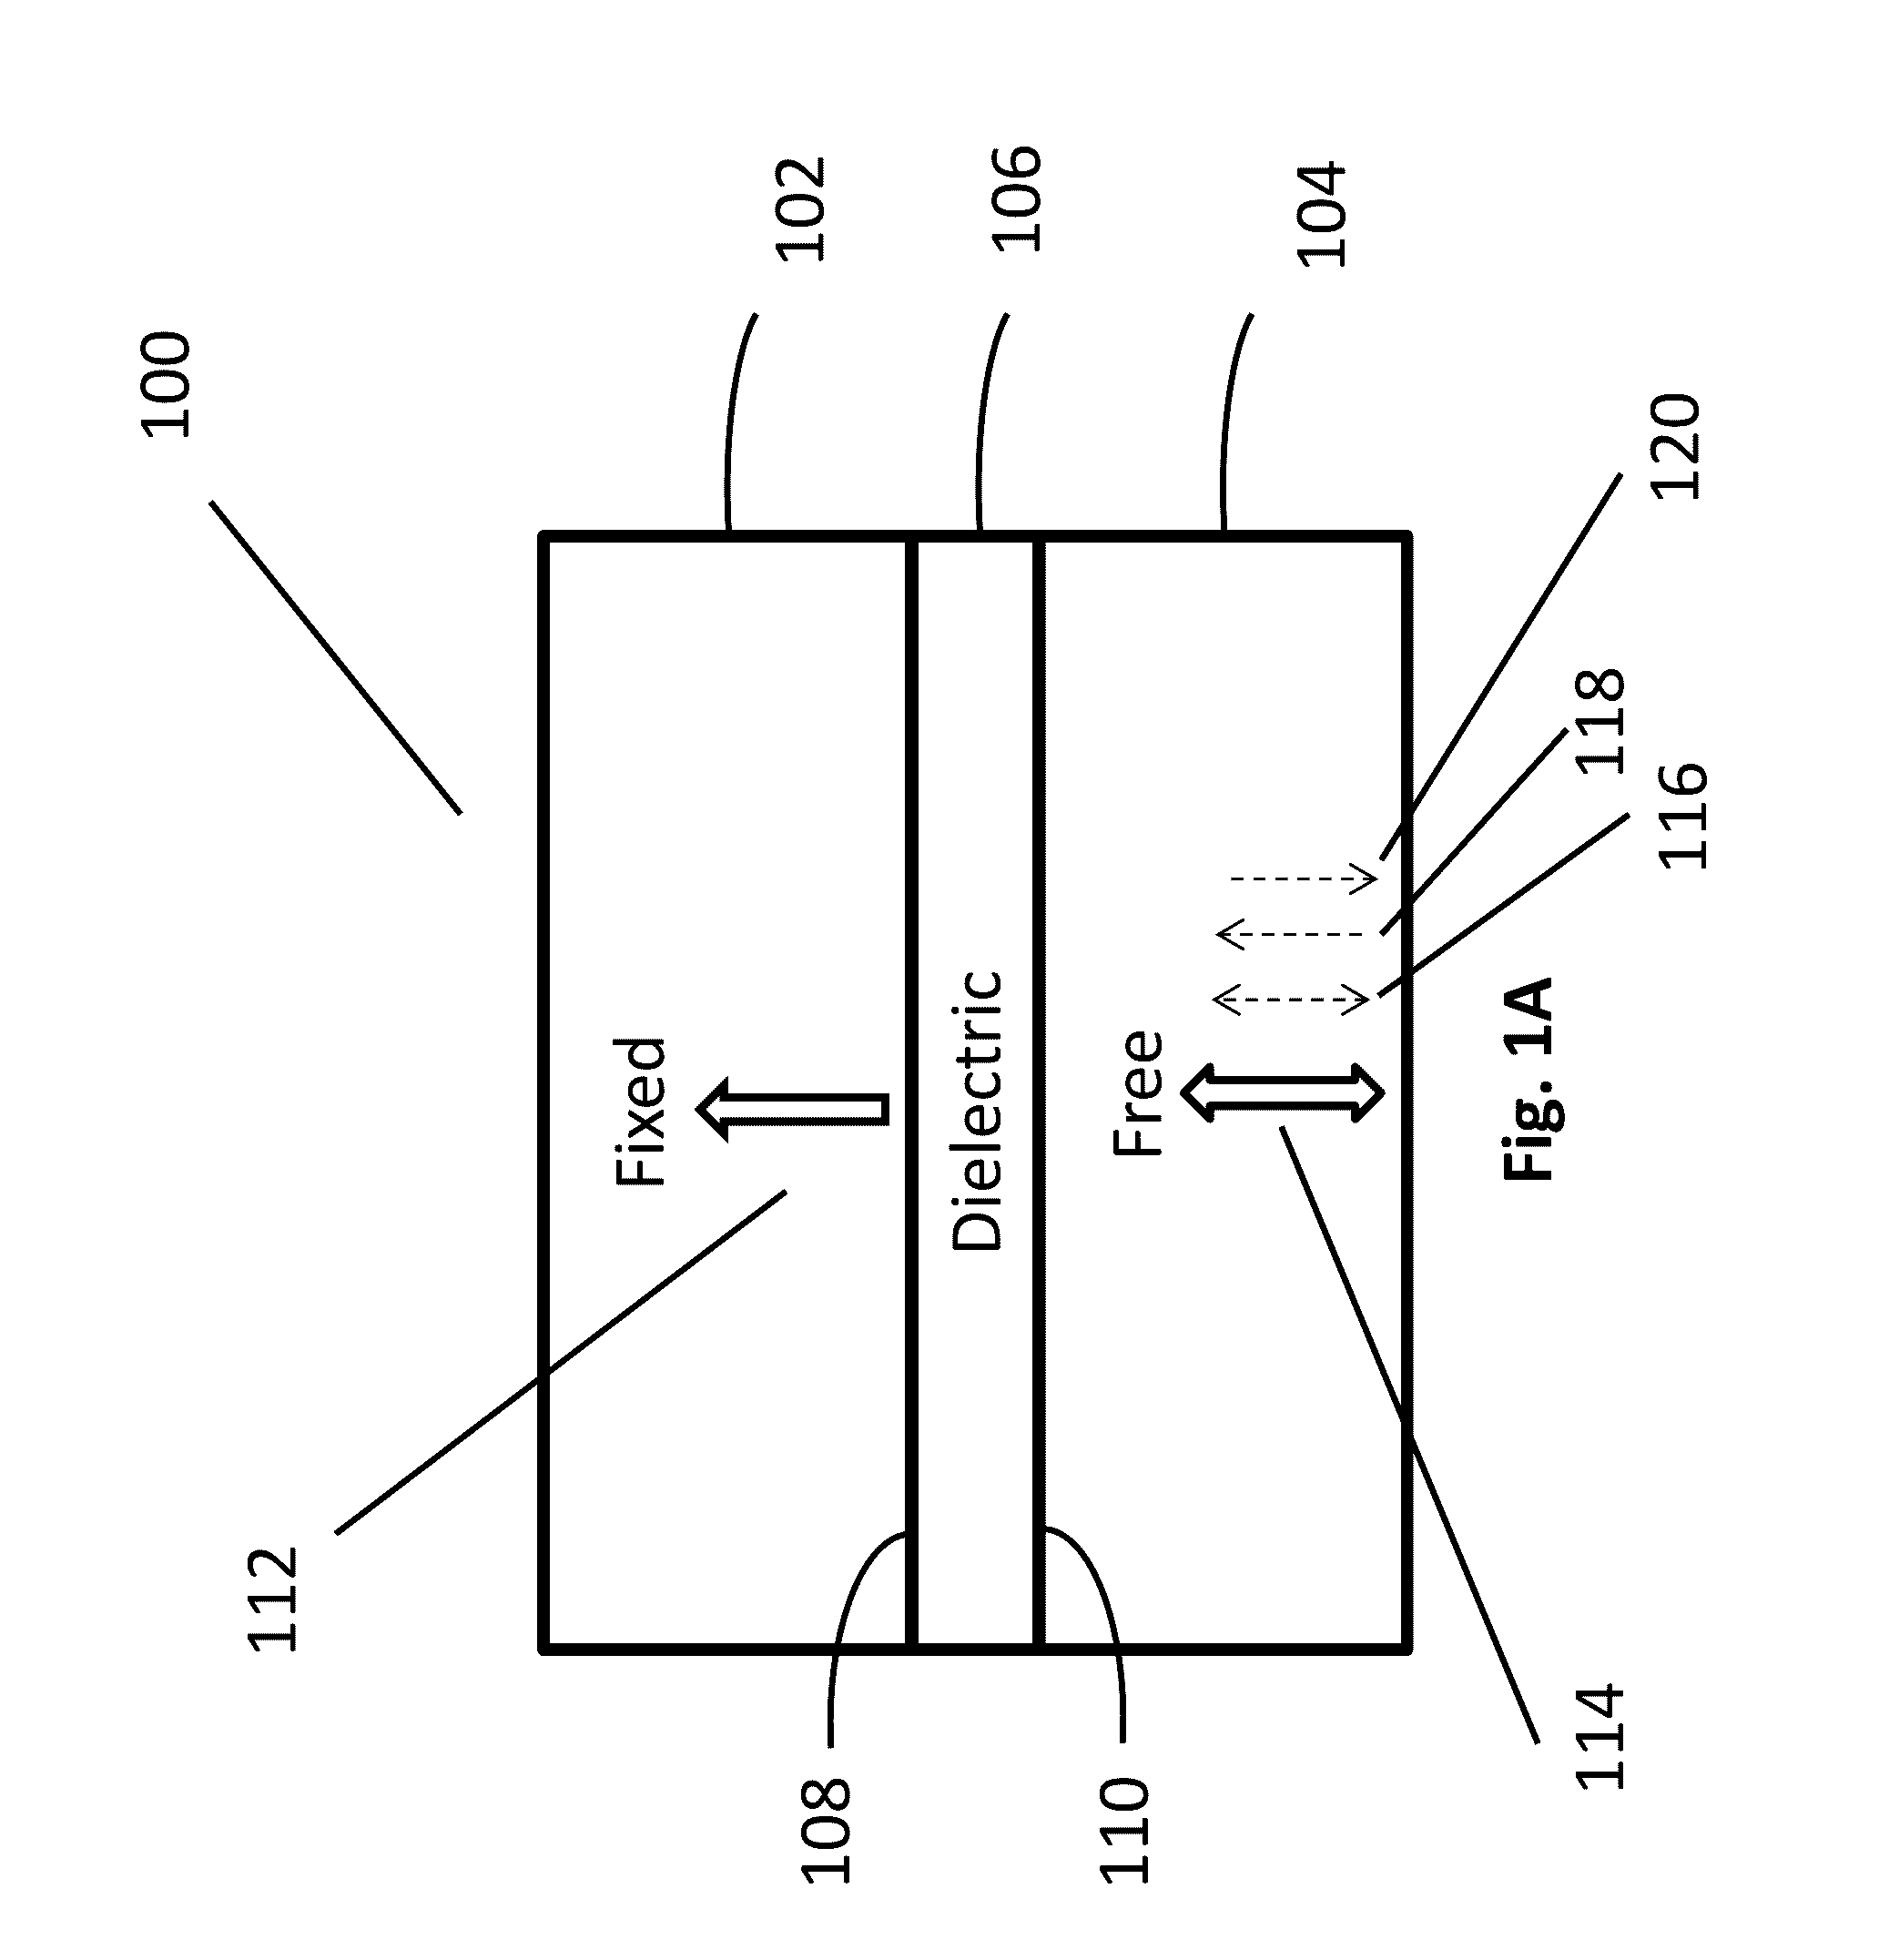 Systems and Methods for Implementing Magnetoelectric Junctions Including Integrated Magnetization Components